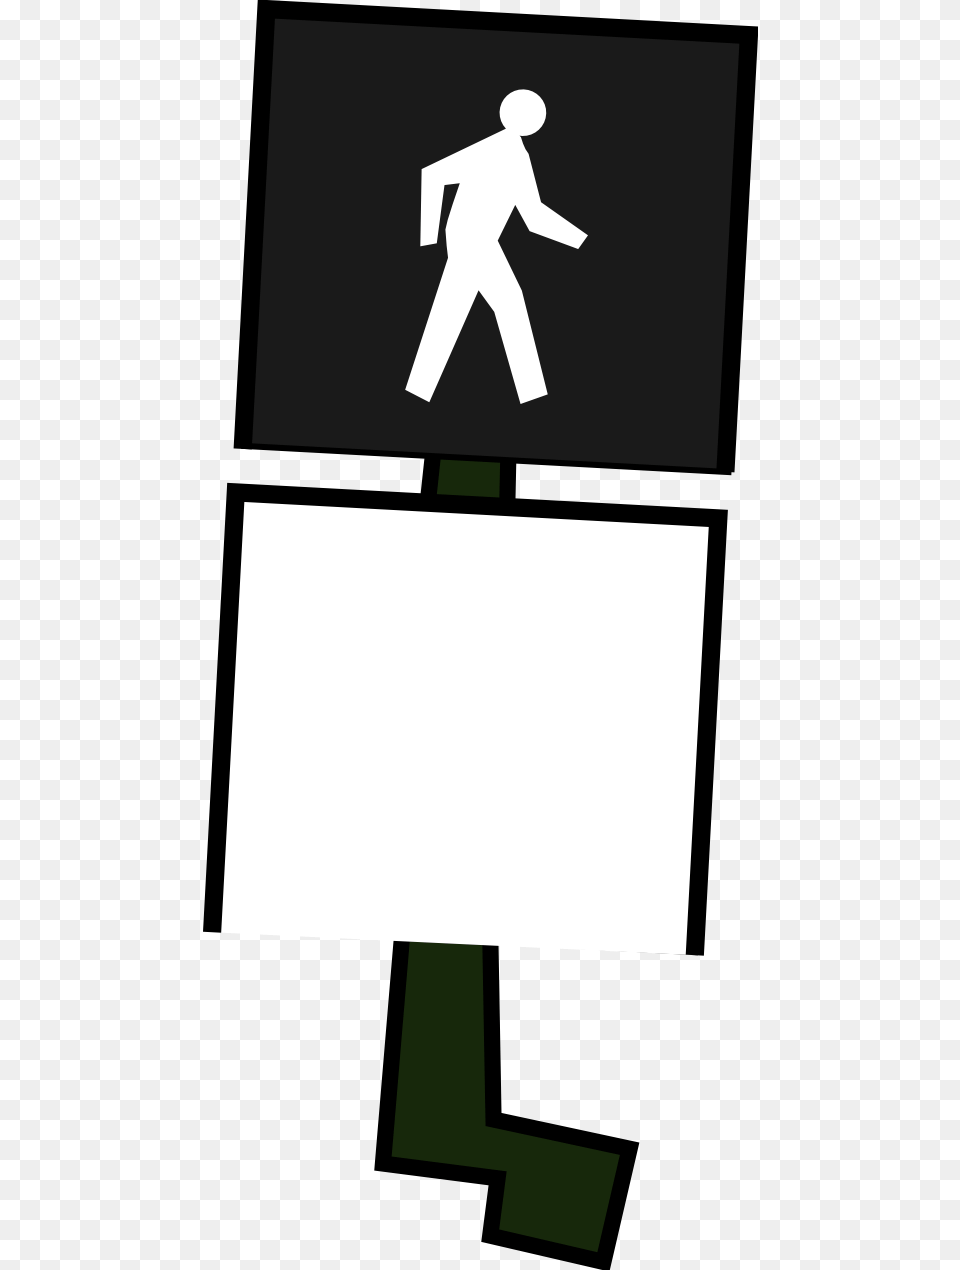 Crosswalk 3 Black White Line Art 555px Label Graphic For Use Pedestrian Route 4quot Dia Adhesive, Adult, Male, Man, Person Png